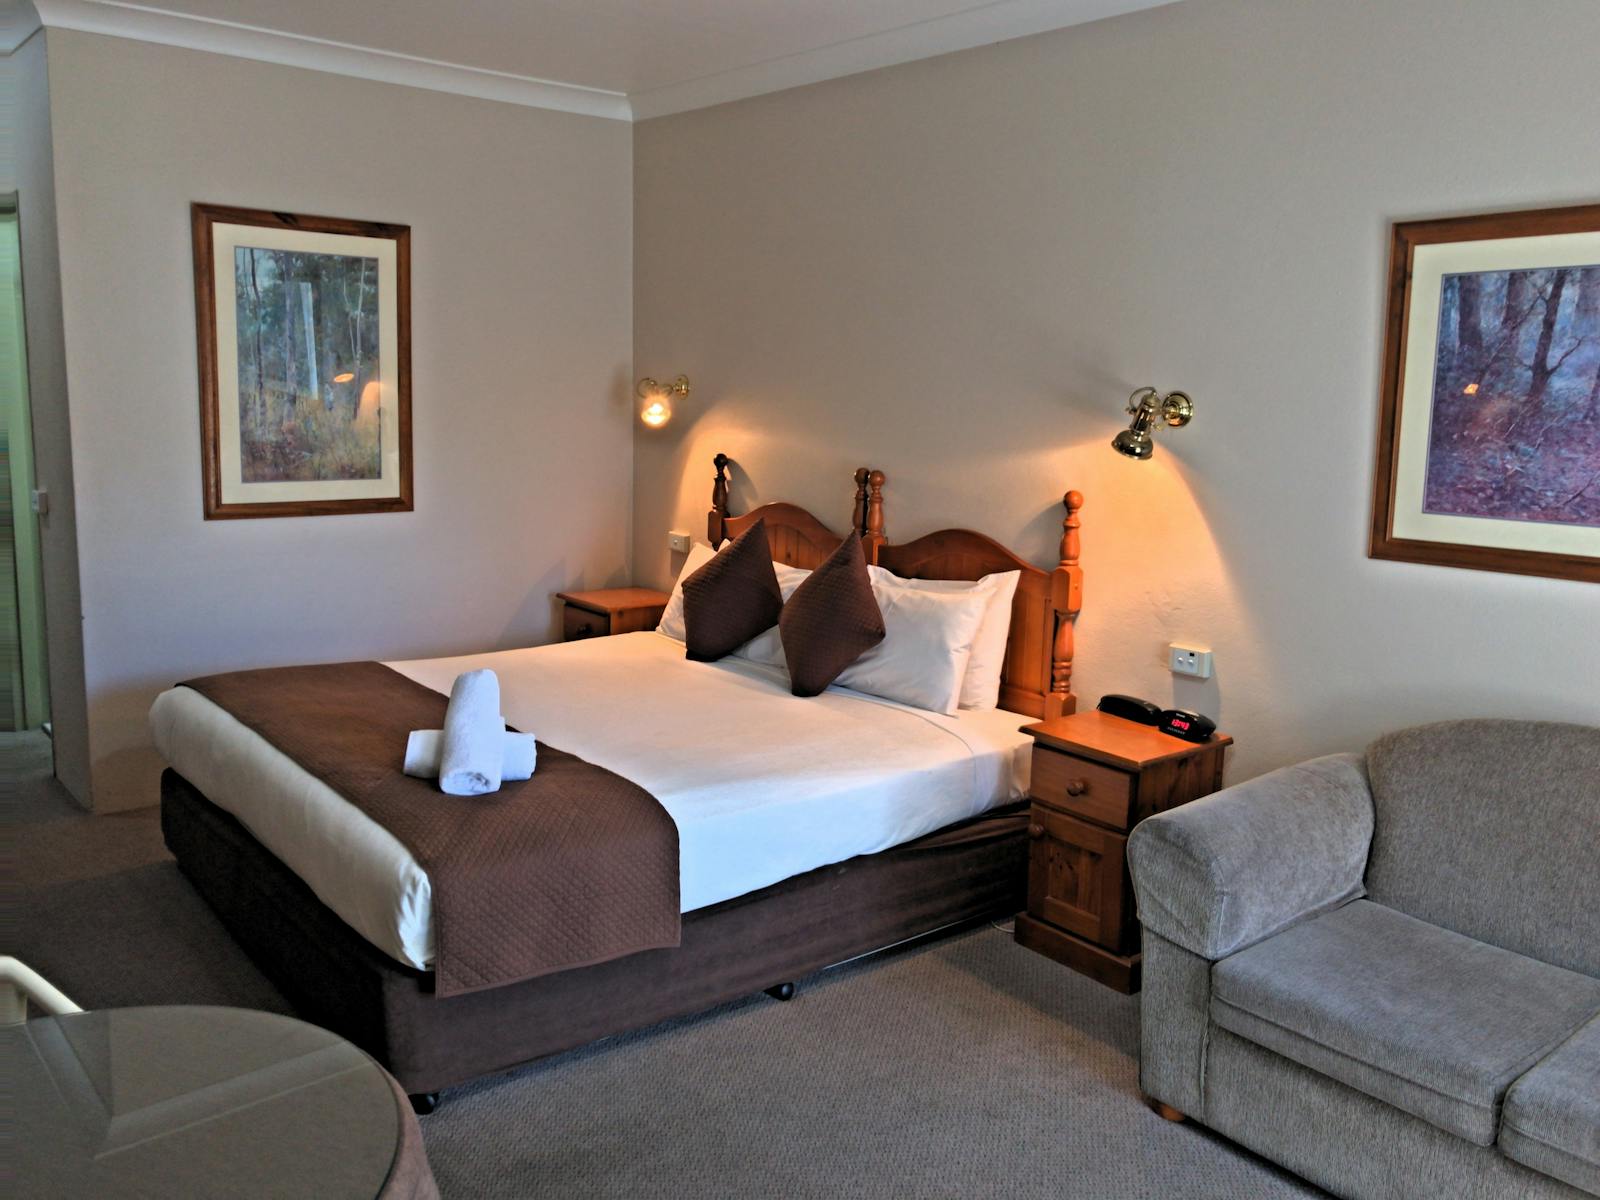 King Room has a king size bed and is suitable for up to two people